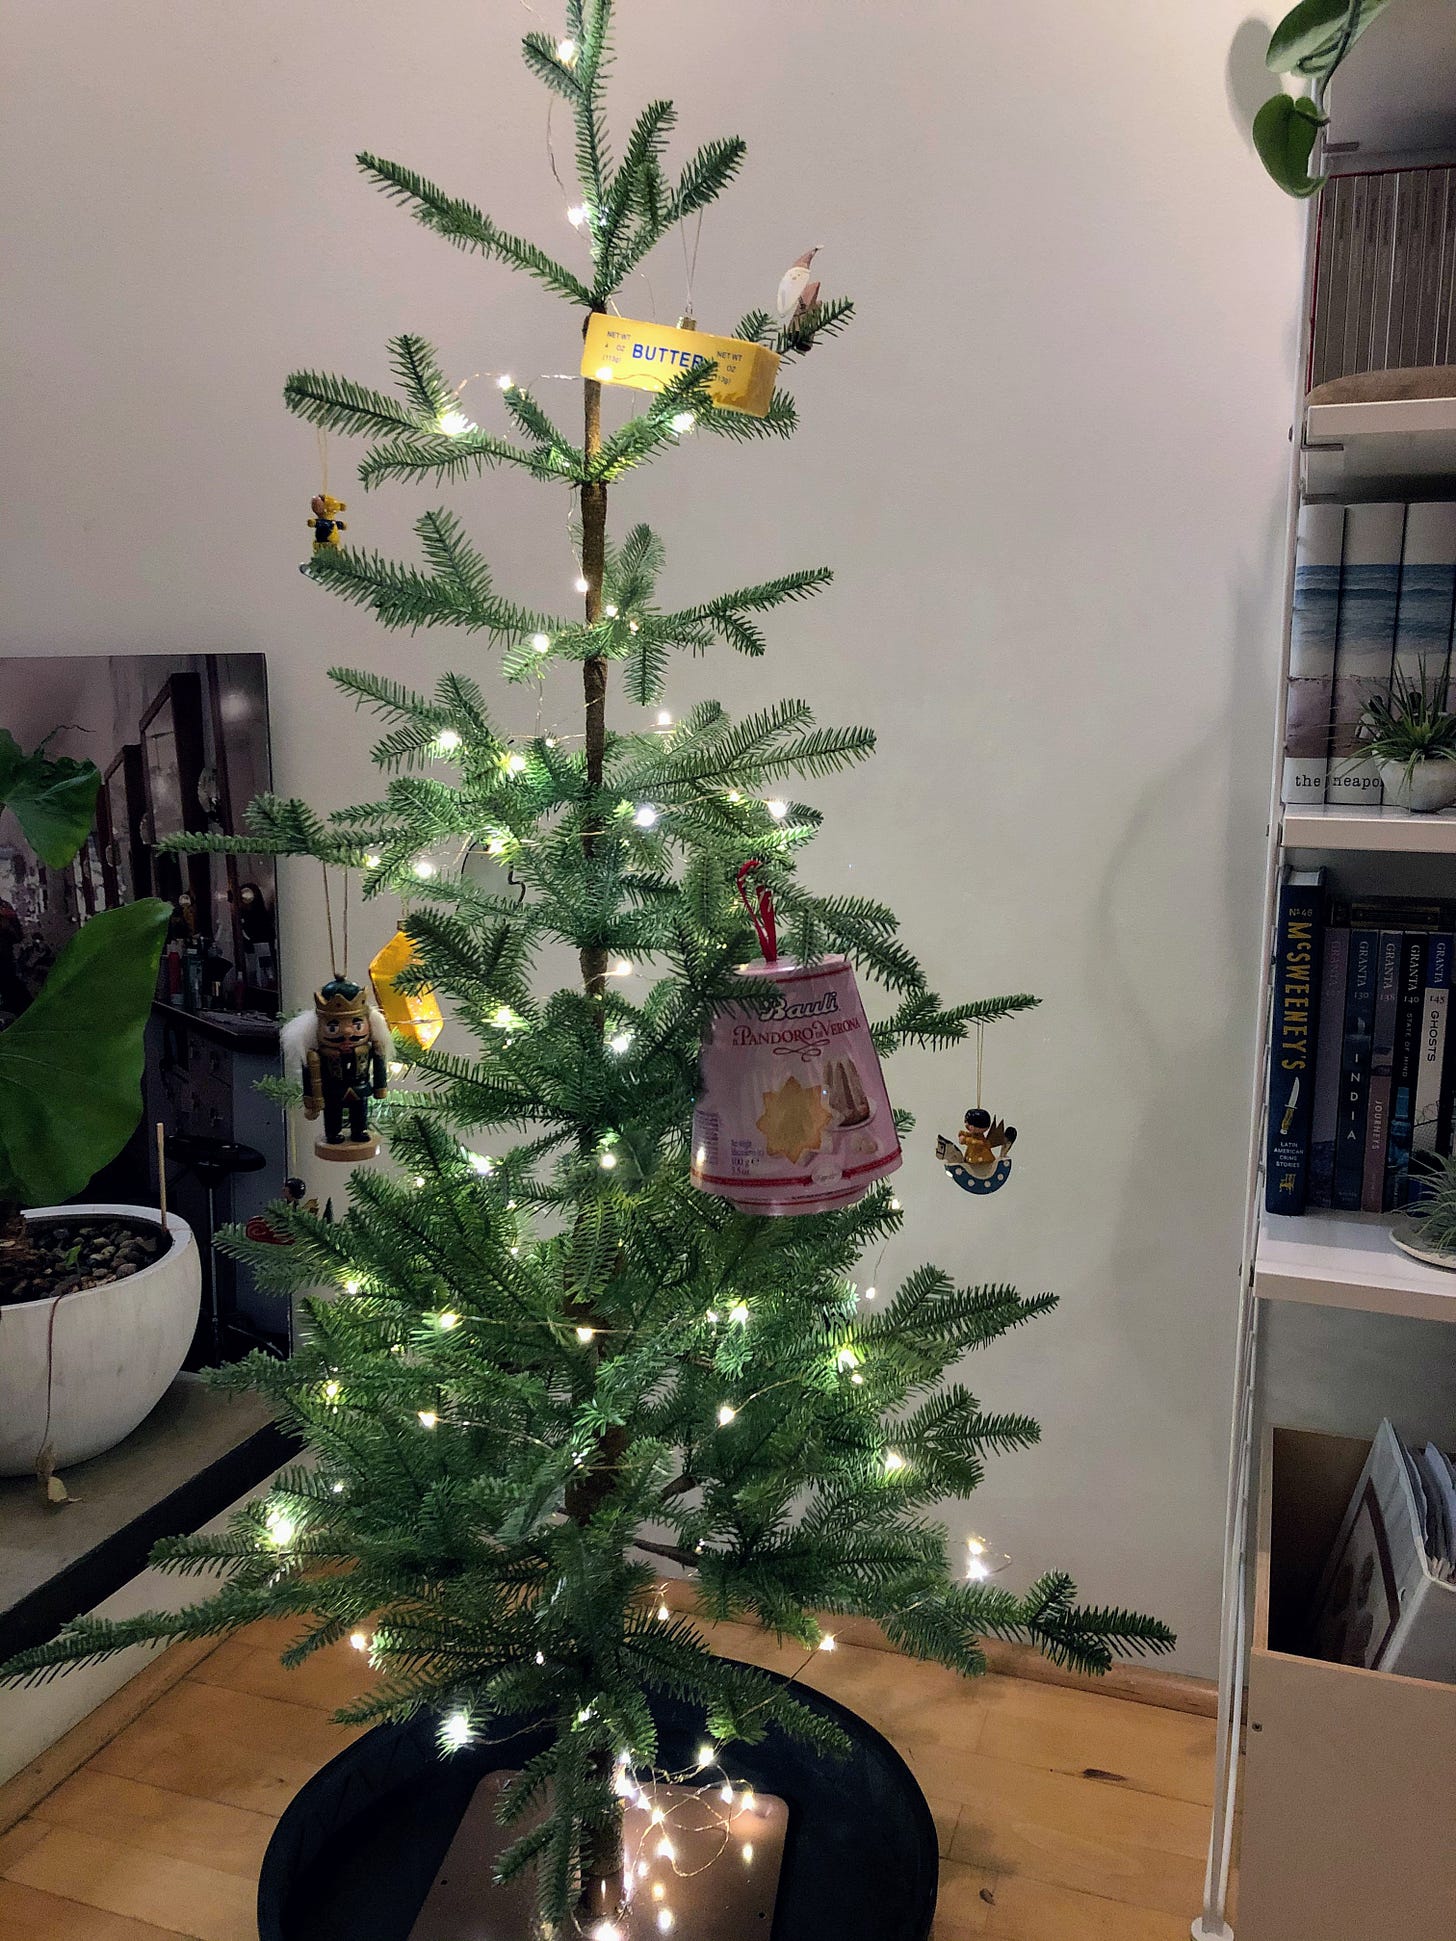 A small decorated Christmas tree with a small box of pandoro hanging on a branch.